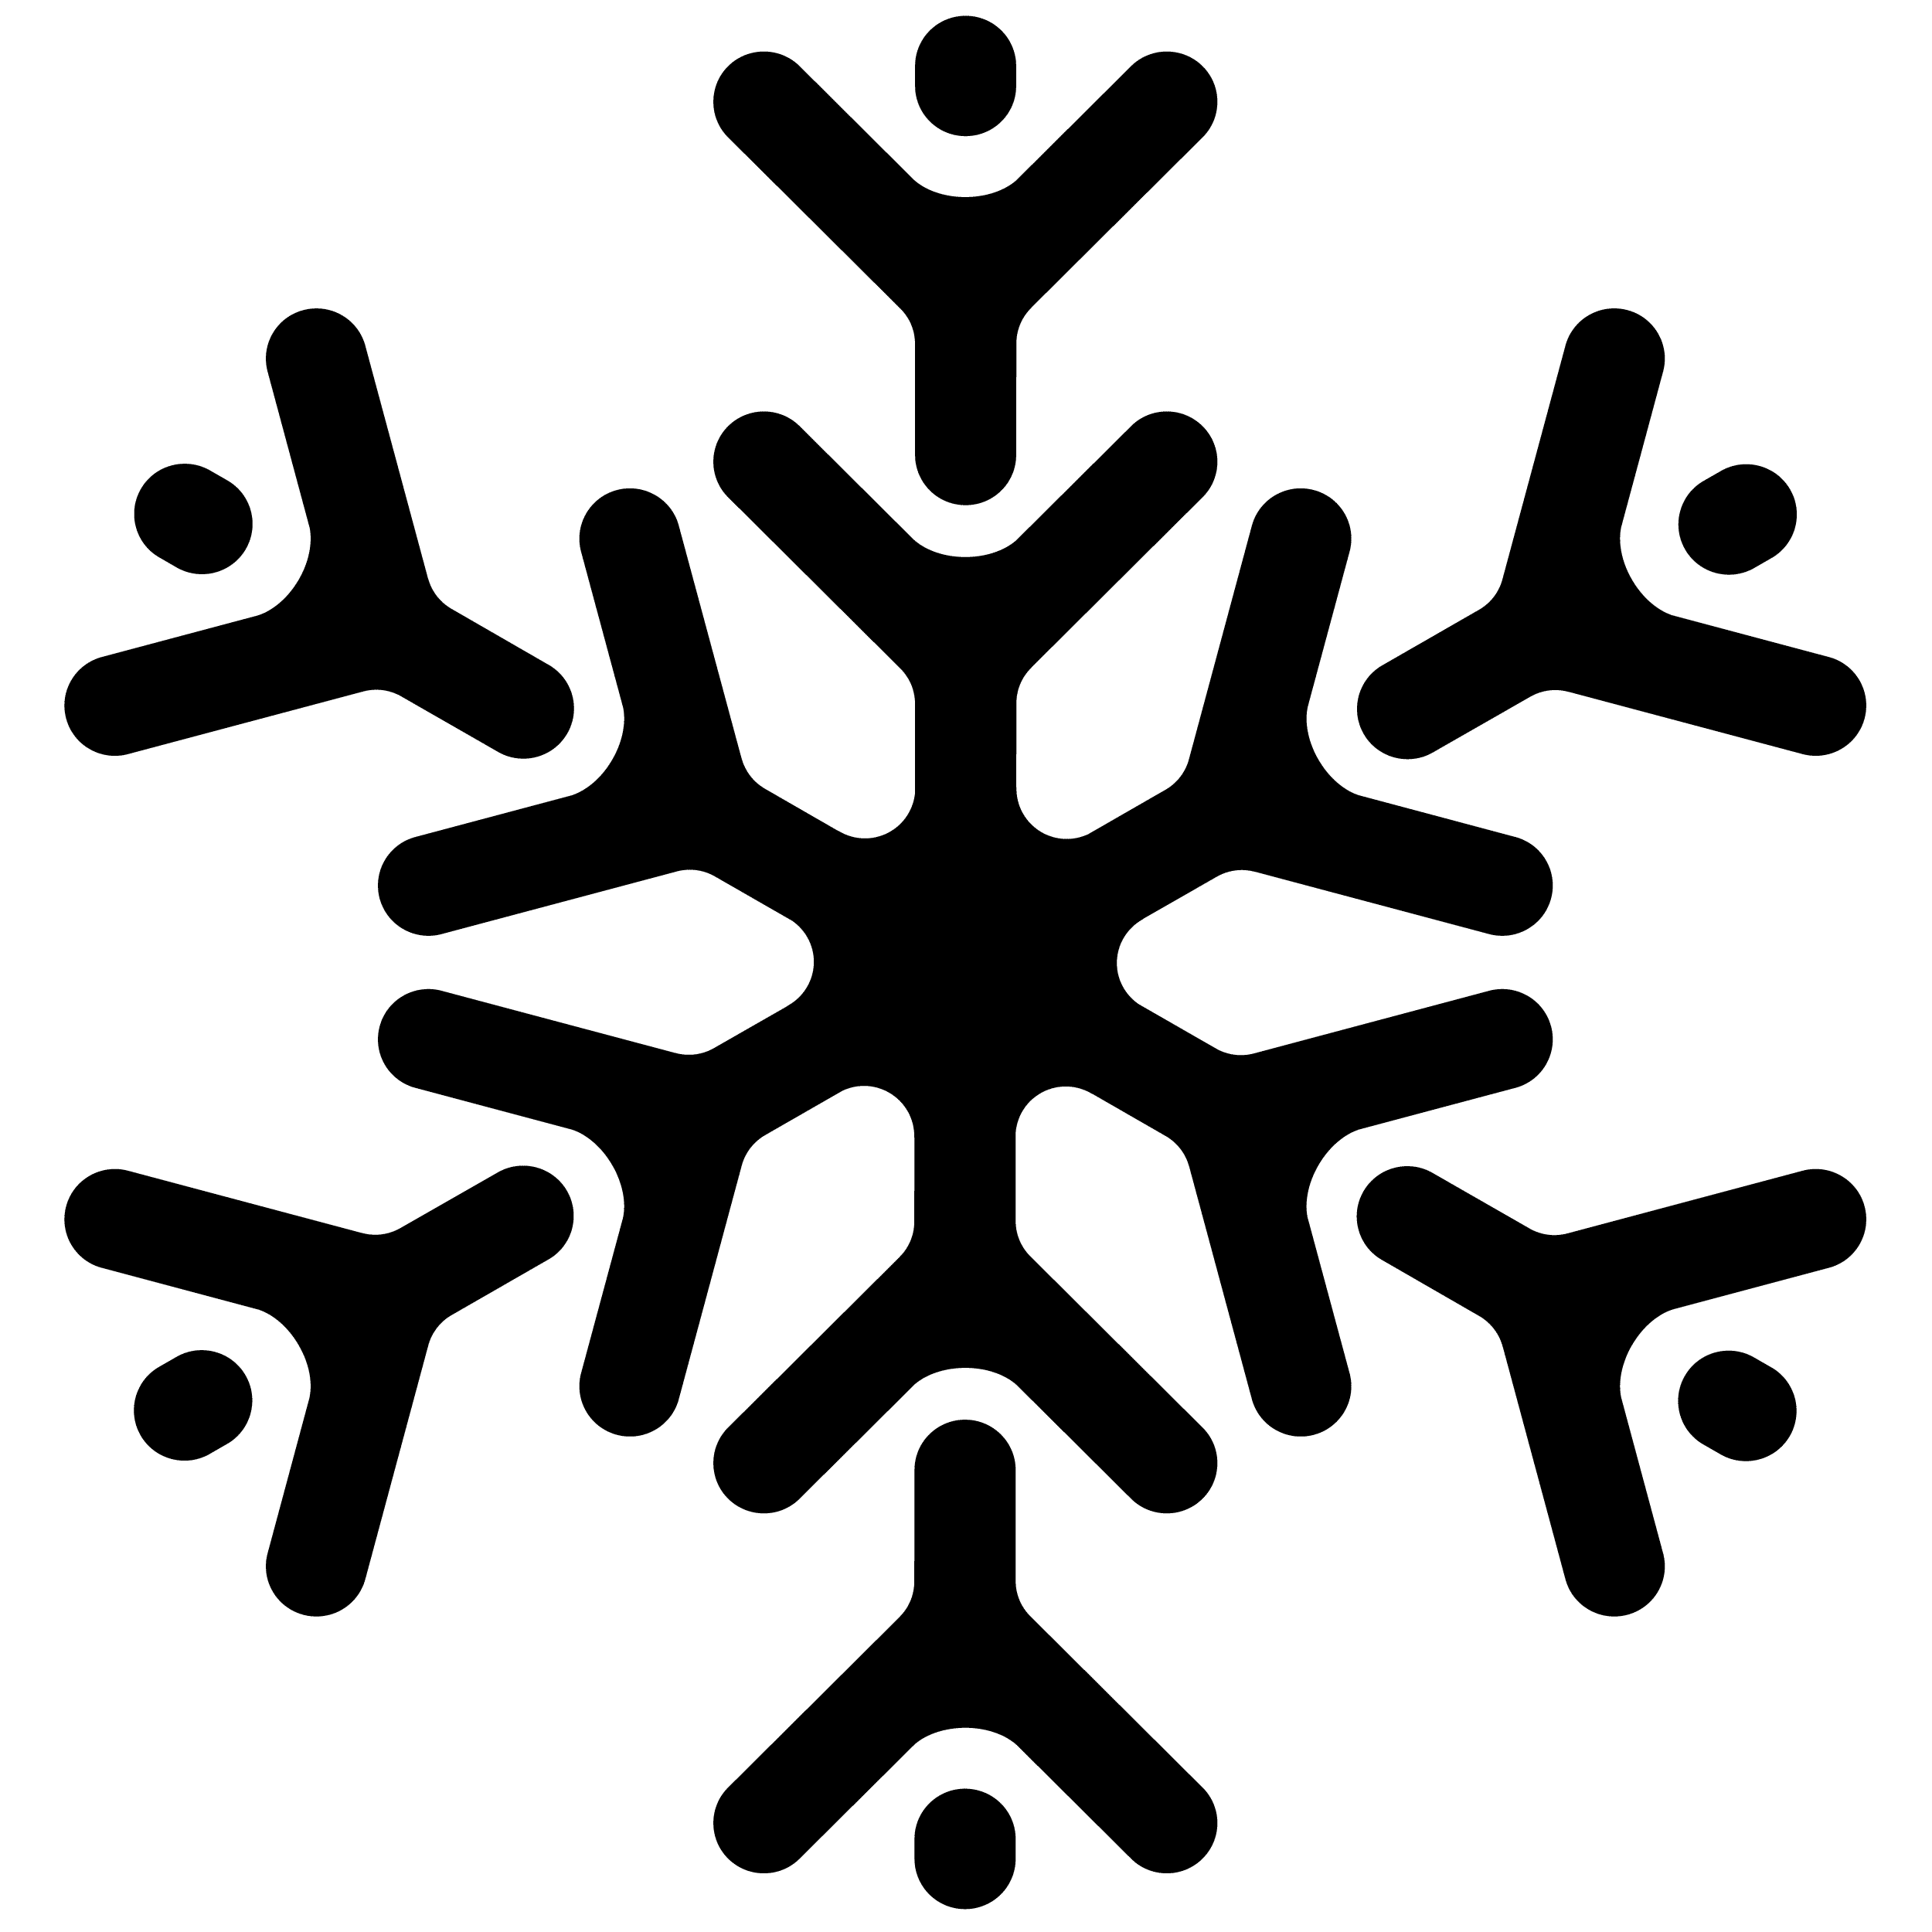 12 Vector Snow Icon Images - Free Vector Snowflake Pattern, Snowflake